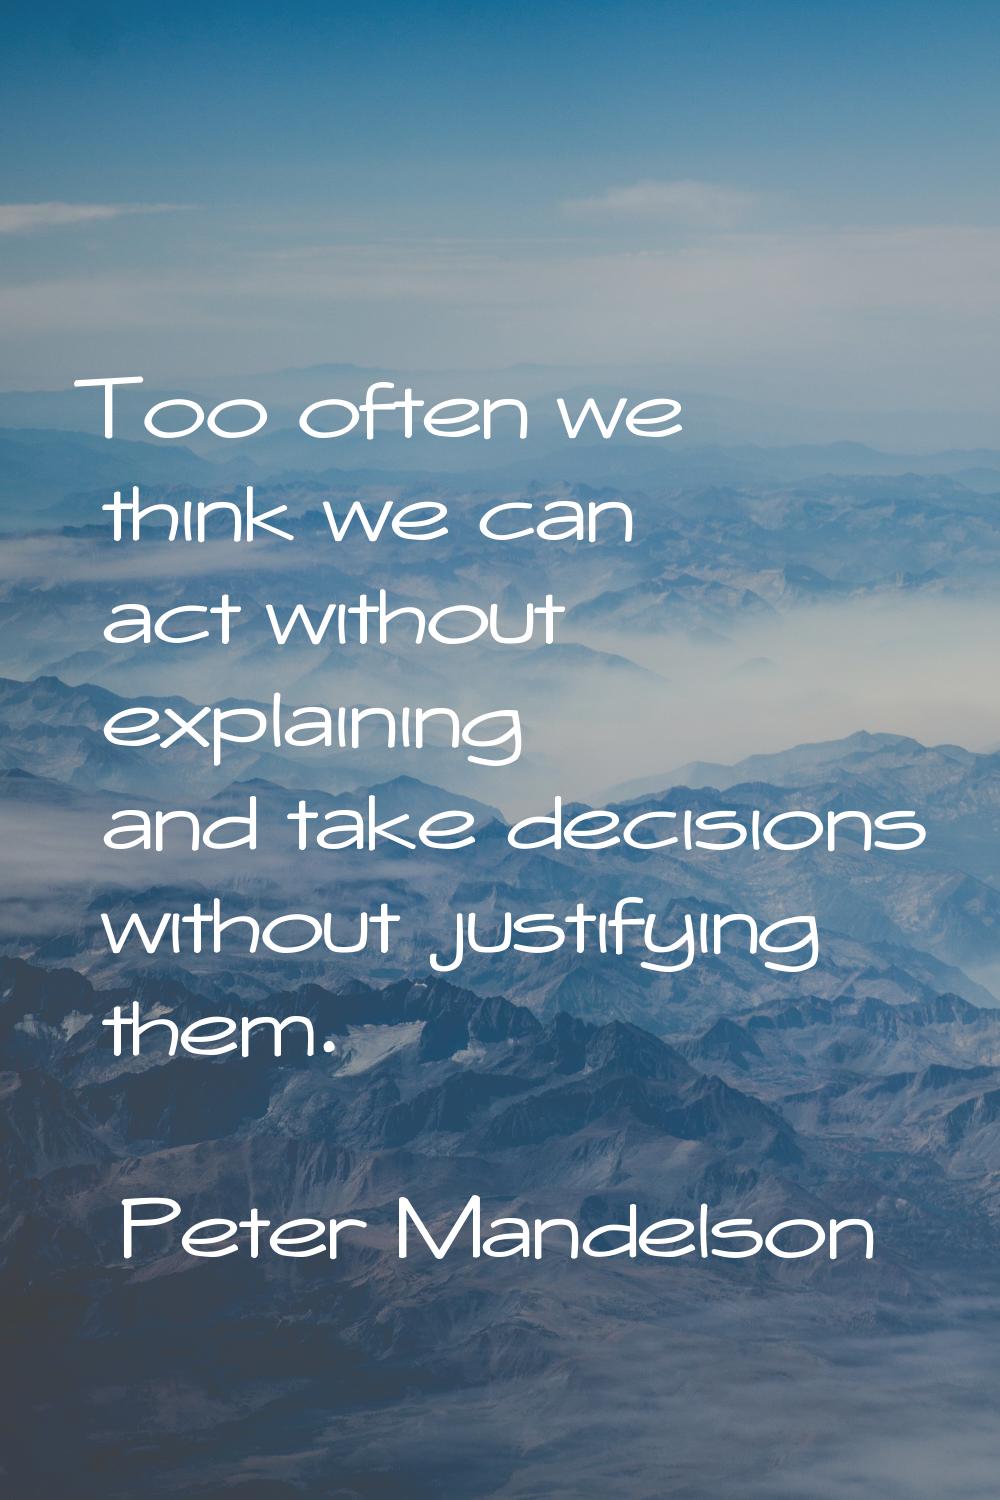 Too often we think we can act without explaining and take decisions without justifying them.